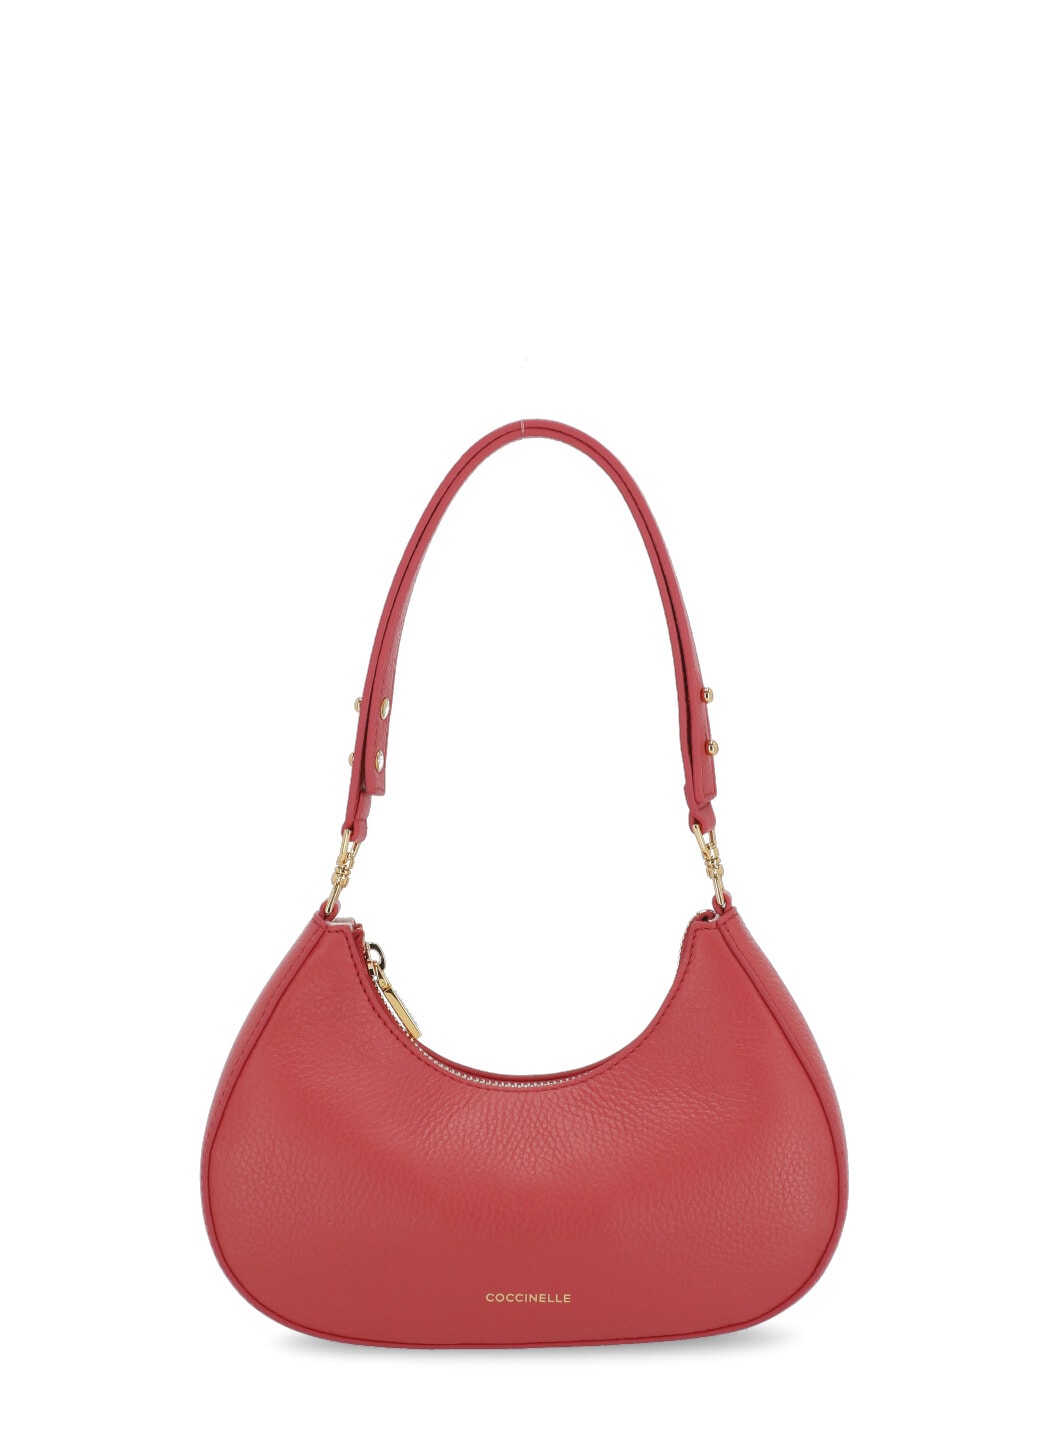 Coccinelle Leather Hand Bag